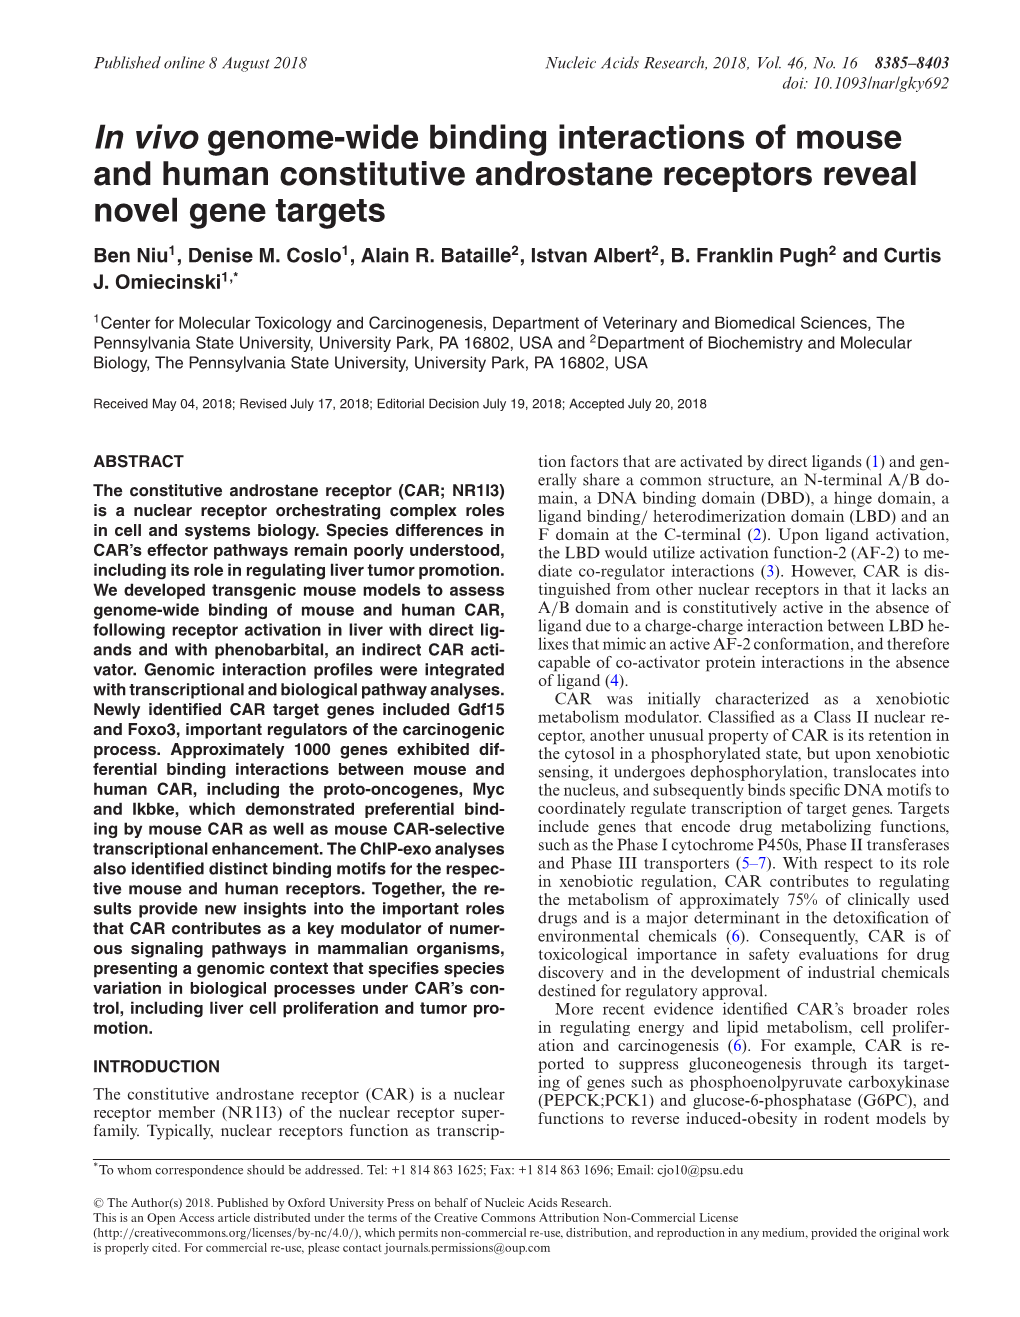 In Vivo Genome-Wide Binding Interactions of Mouse and Human Constitutive Androstane Receptors Reveal Novel Gene Targets Ben Niu1, Denise M